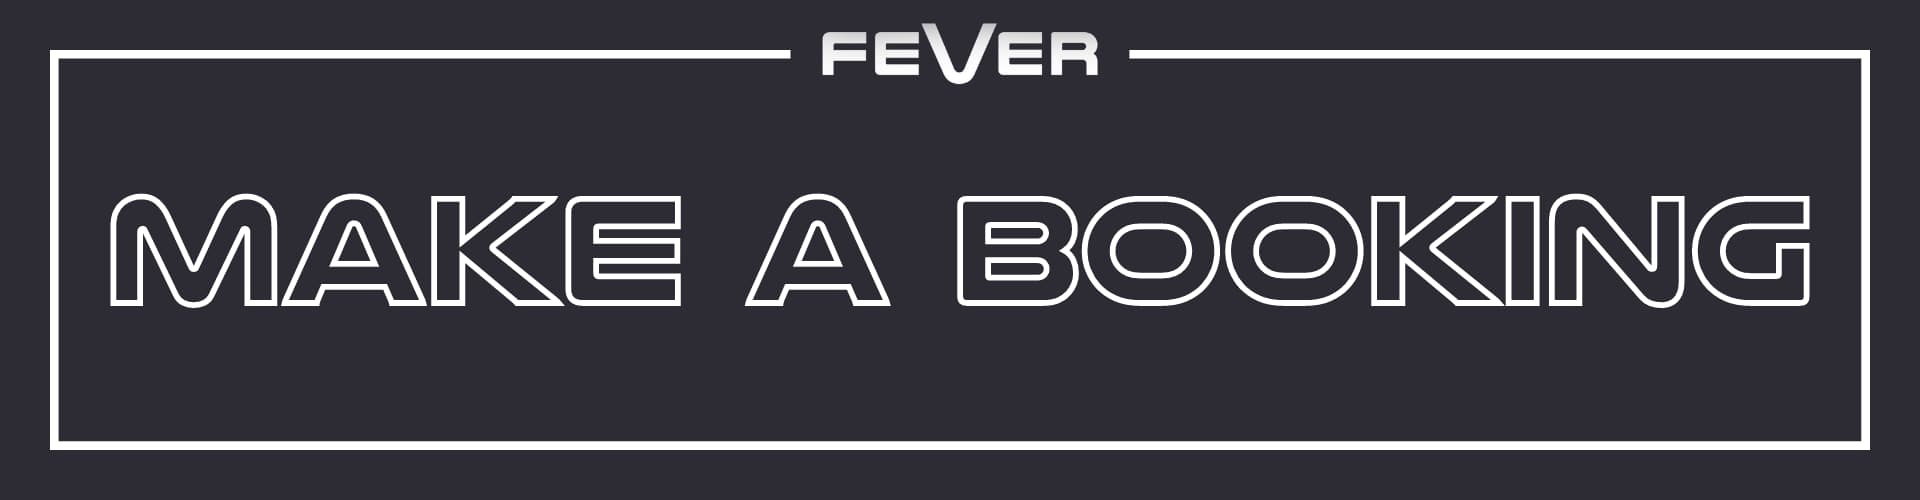 Make a Booking at Fever